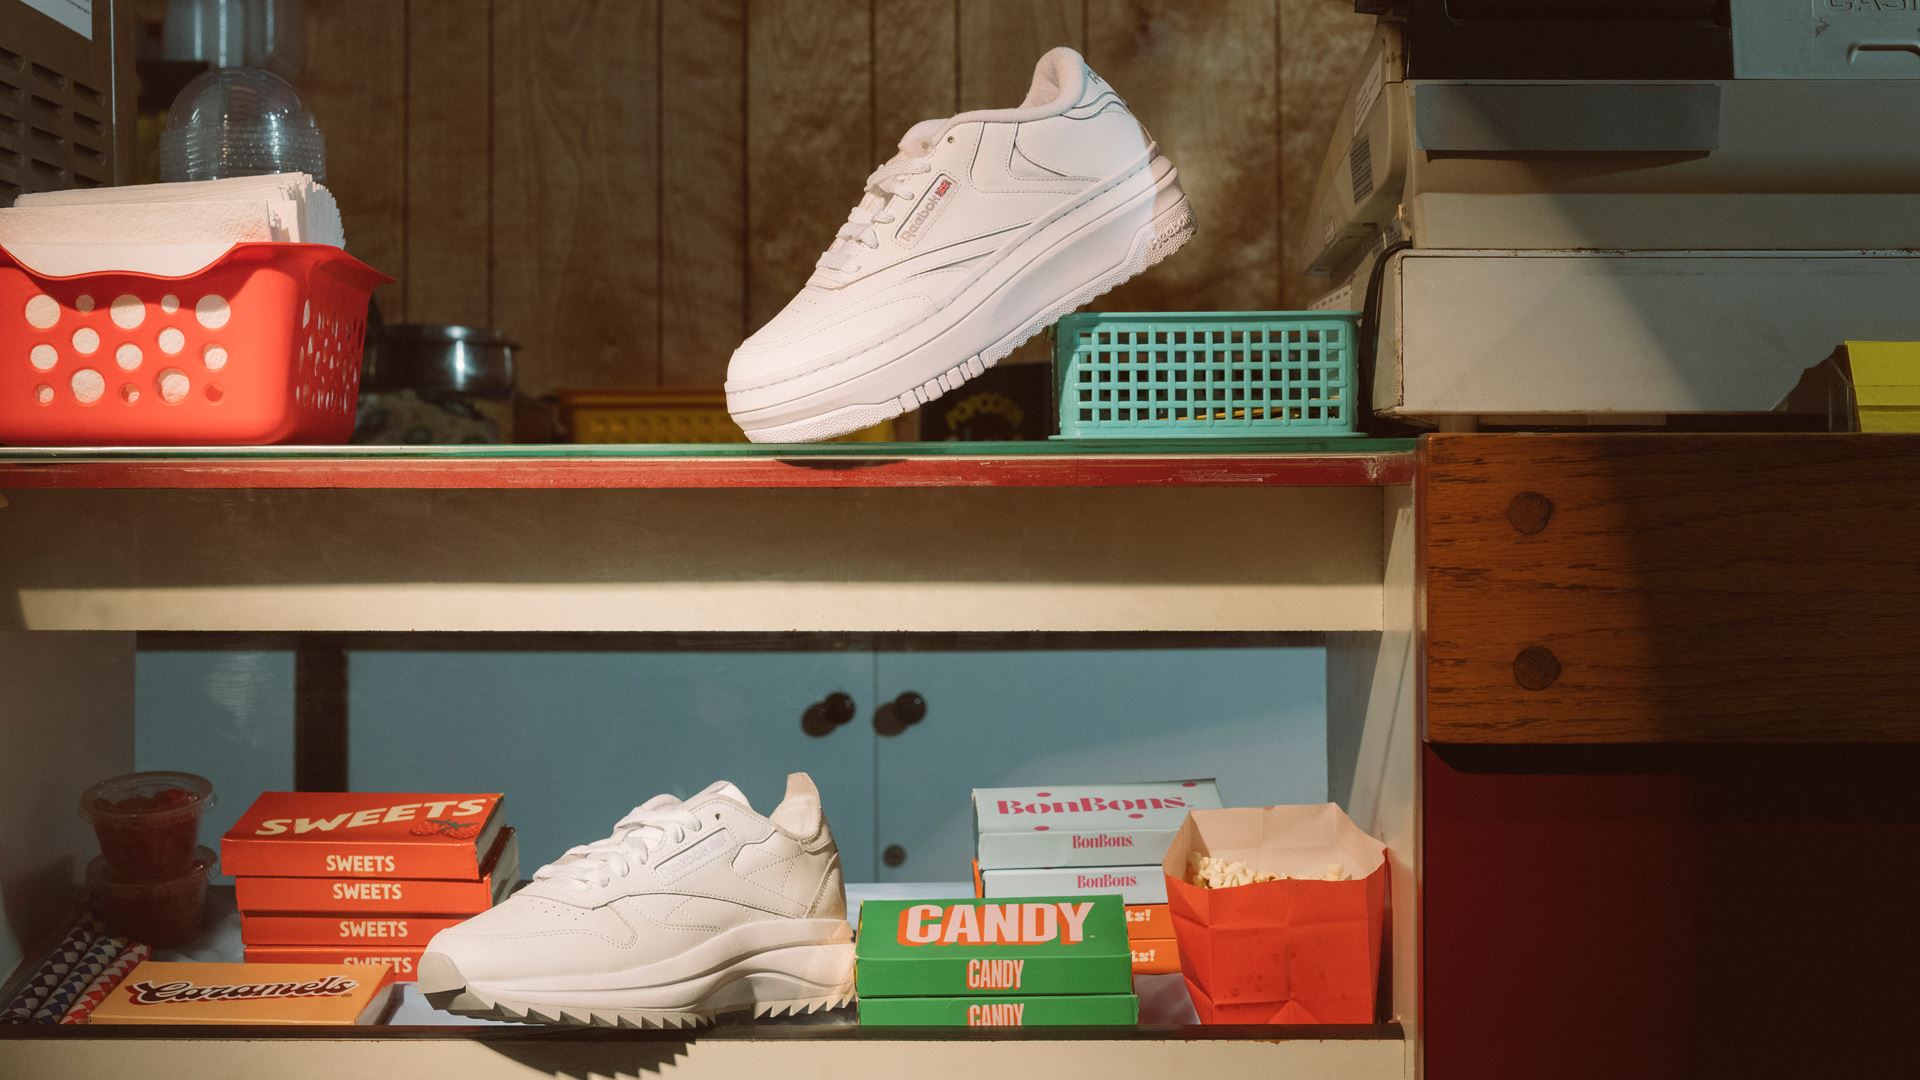 tempo Besparing Vesting Reebok Debuts 'Extras' Collection Featuring Club C and Classic Leather  Platform Models